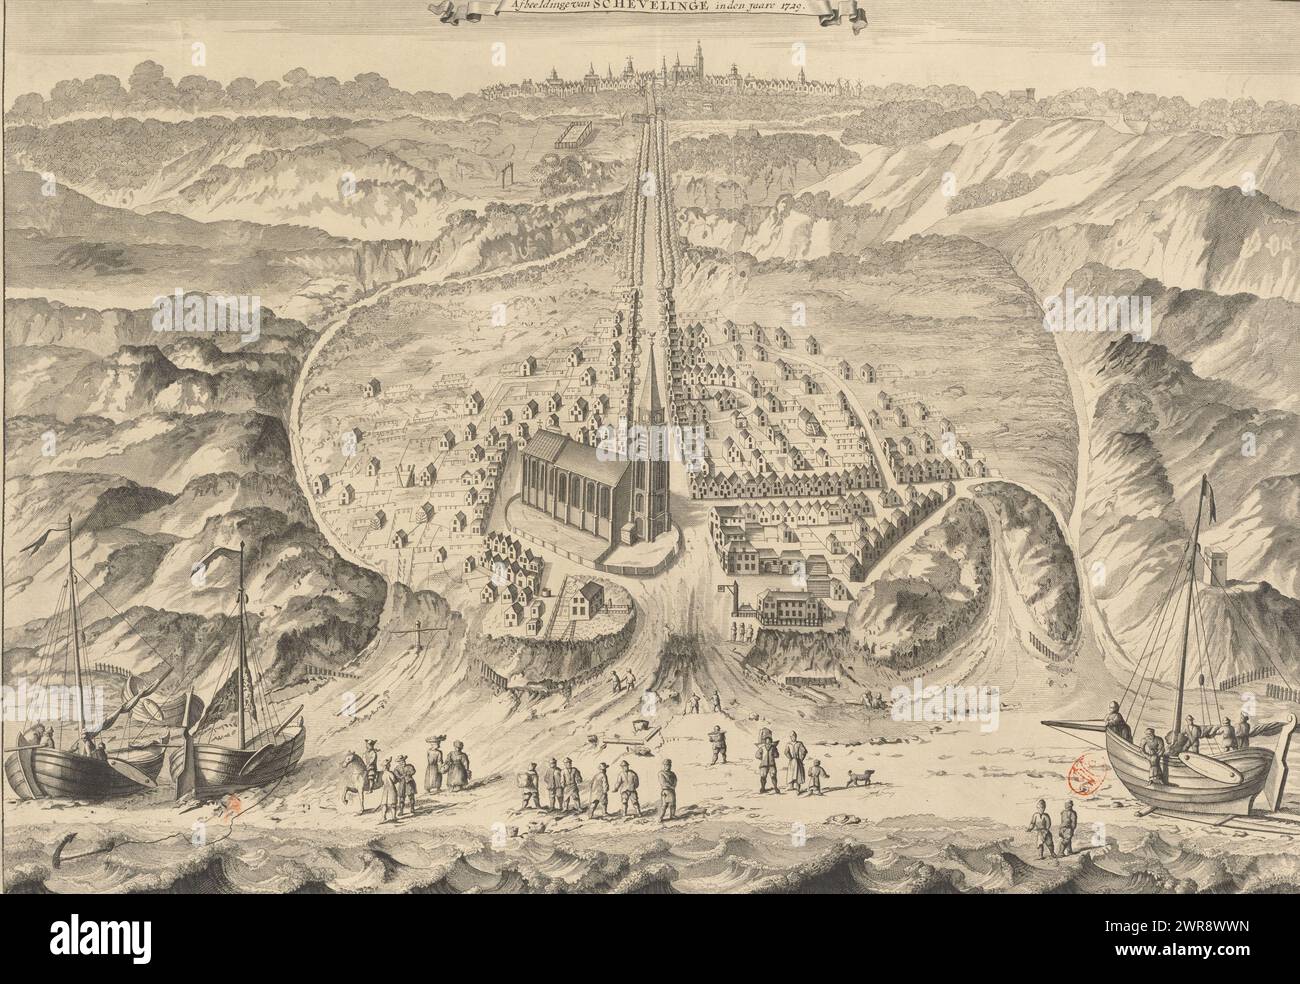 View of Scheveningen, 1729, Image of Schevelinge in the year 1729 (title on object), View of the village of Scheveningen in the year 1729. In the foreground the sea and the beach with a number of figures and ships. Behind it the village with the church in the middle. In the background The Hague. Above a banderole with the title., print maker: anonymous, after drawing by: Gerrit van Giessen, publisher: Reinier Boitet, after drawing by: The Hague, publisher: Delft, publisher: Amsterdam, 1729 - 1736, paper, engraving, etching, height 354 mm × width 510 mm Stock Photo